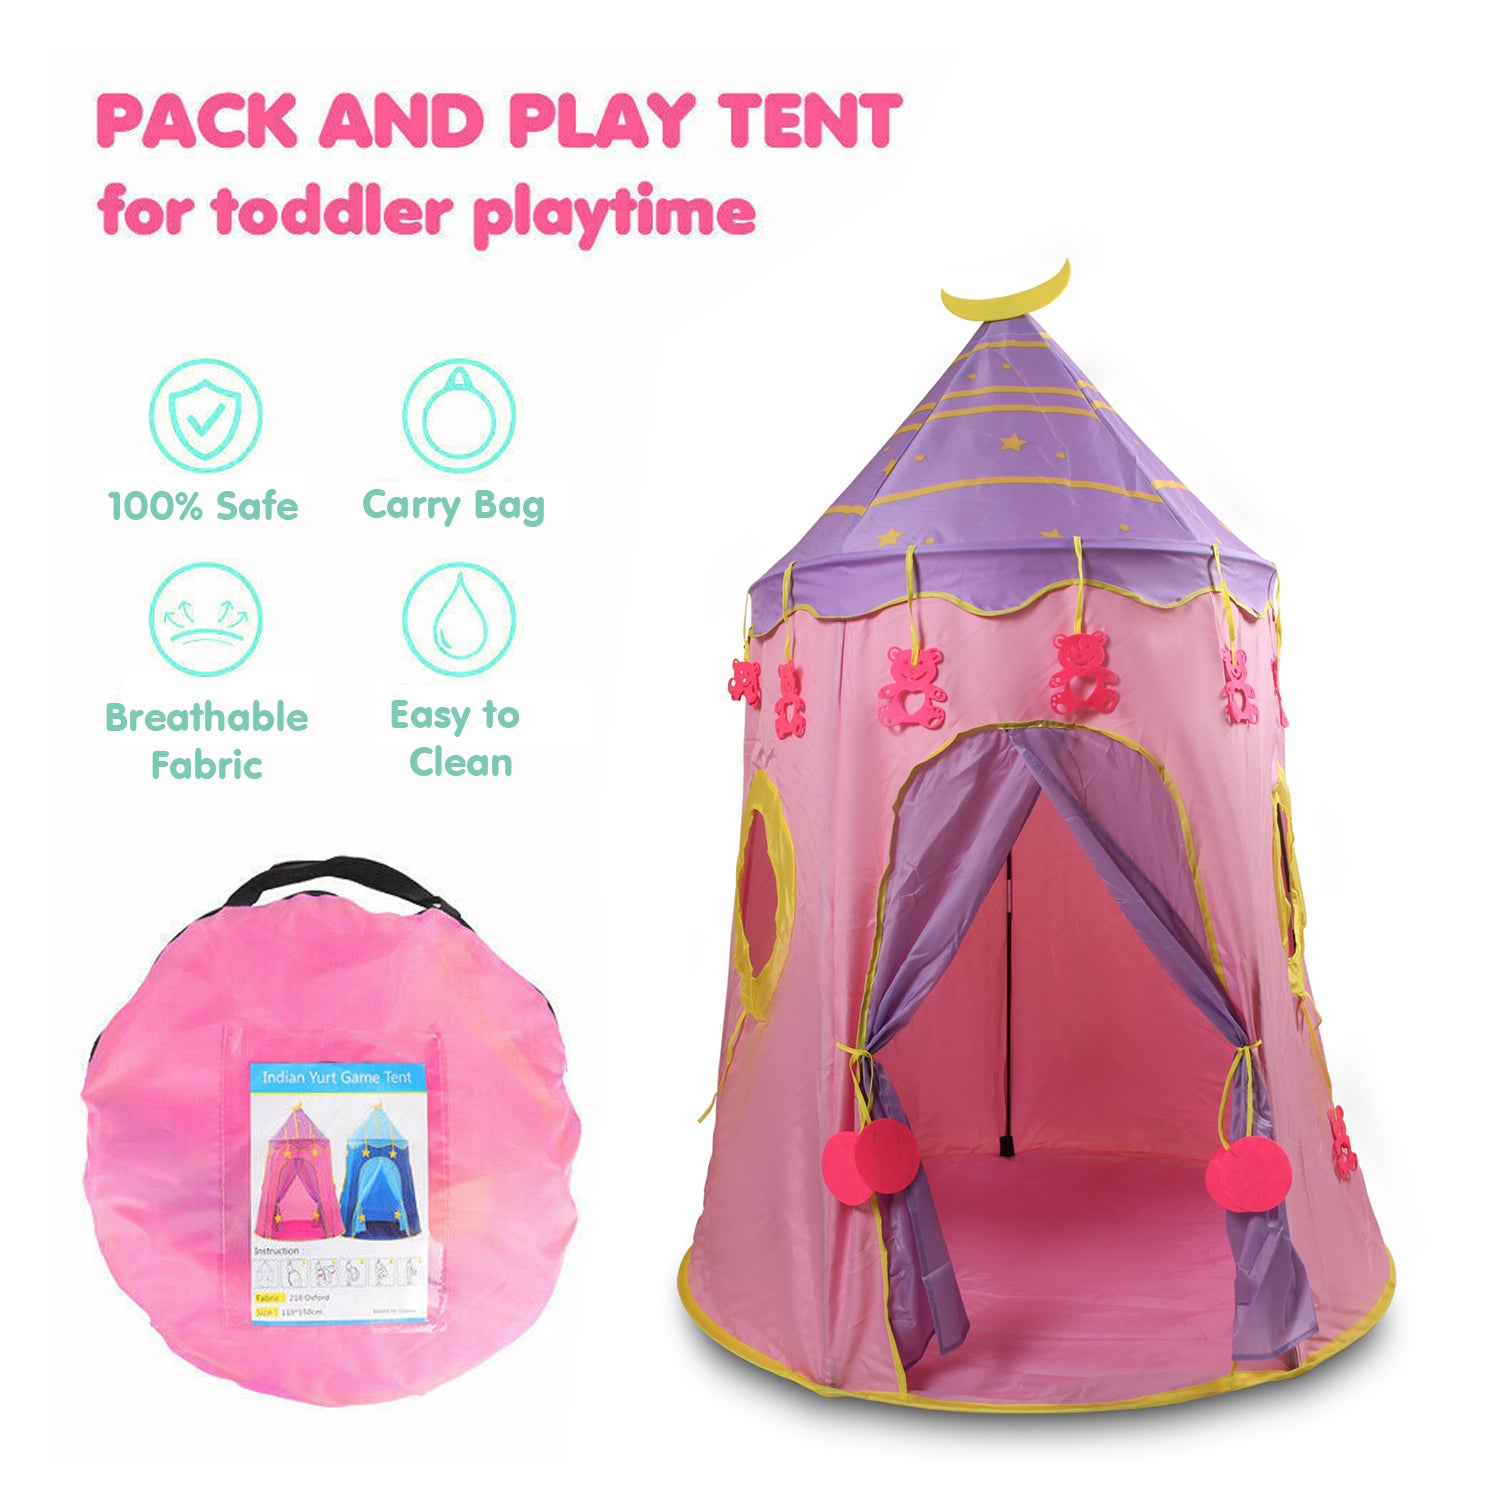 Playtime Foldable Tent House Star Teddy - Pink - Baby Moo